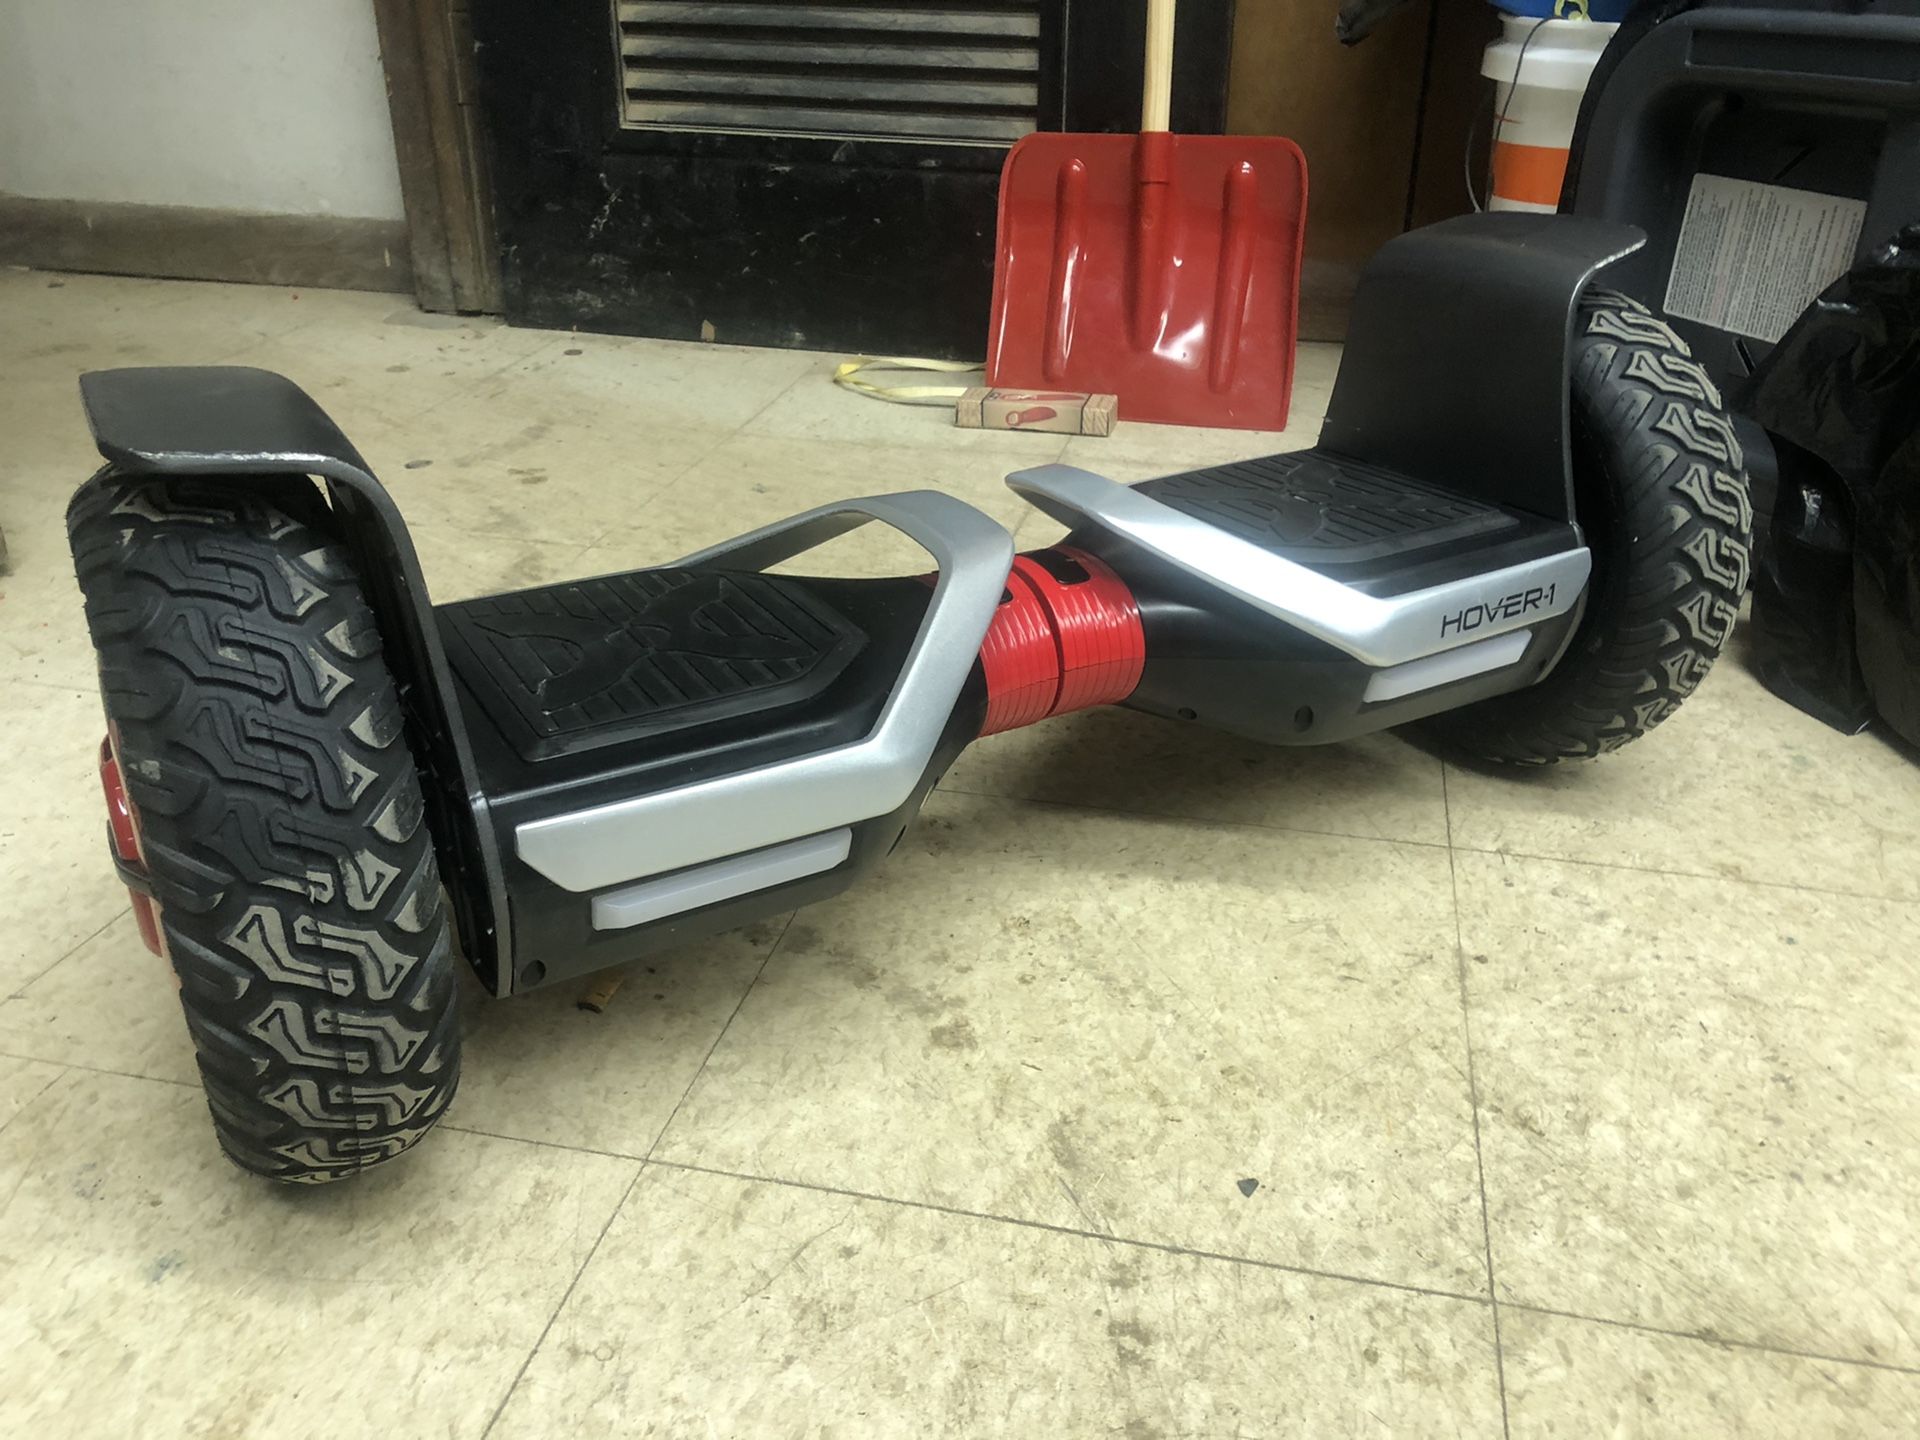 Hover-1 Beast UL Hoverboard w/ 10 Off-Road Wheels, LED Lights, Bluetooth Speaker, and App